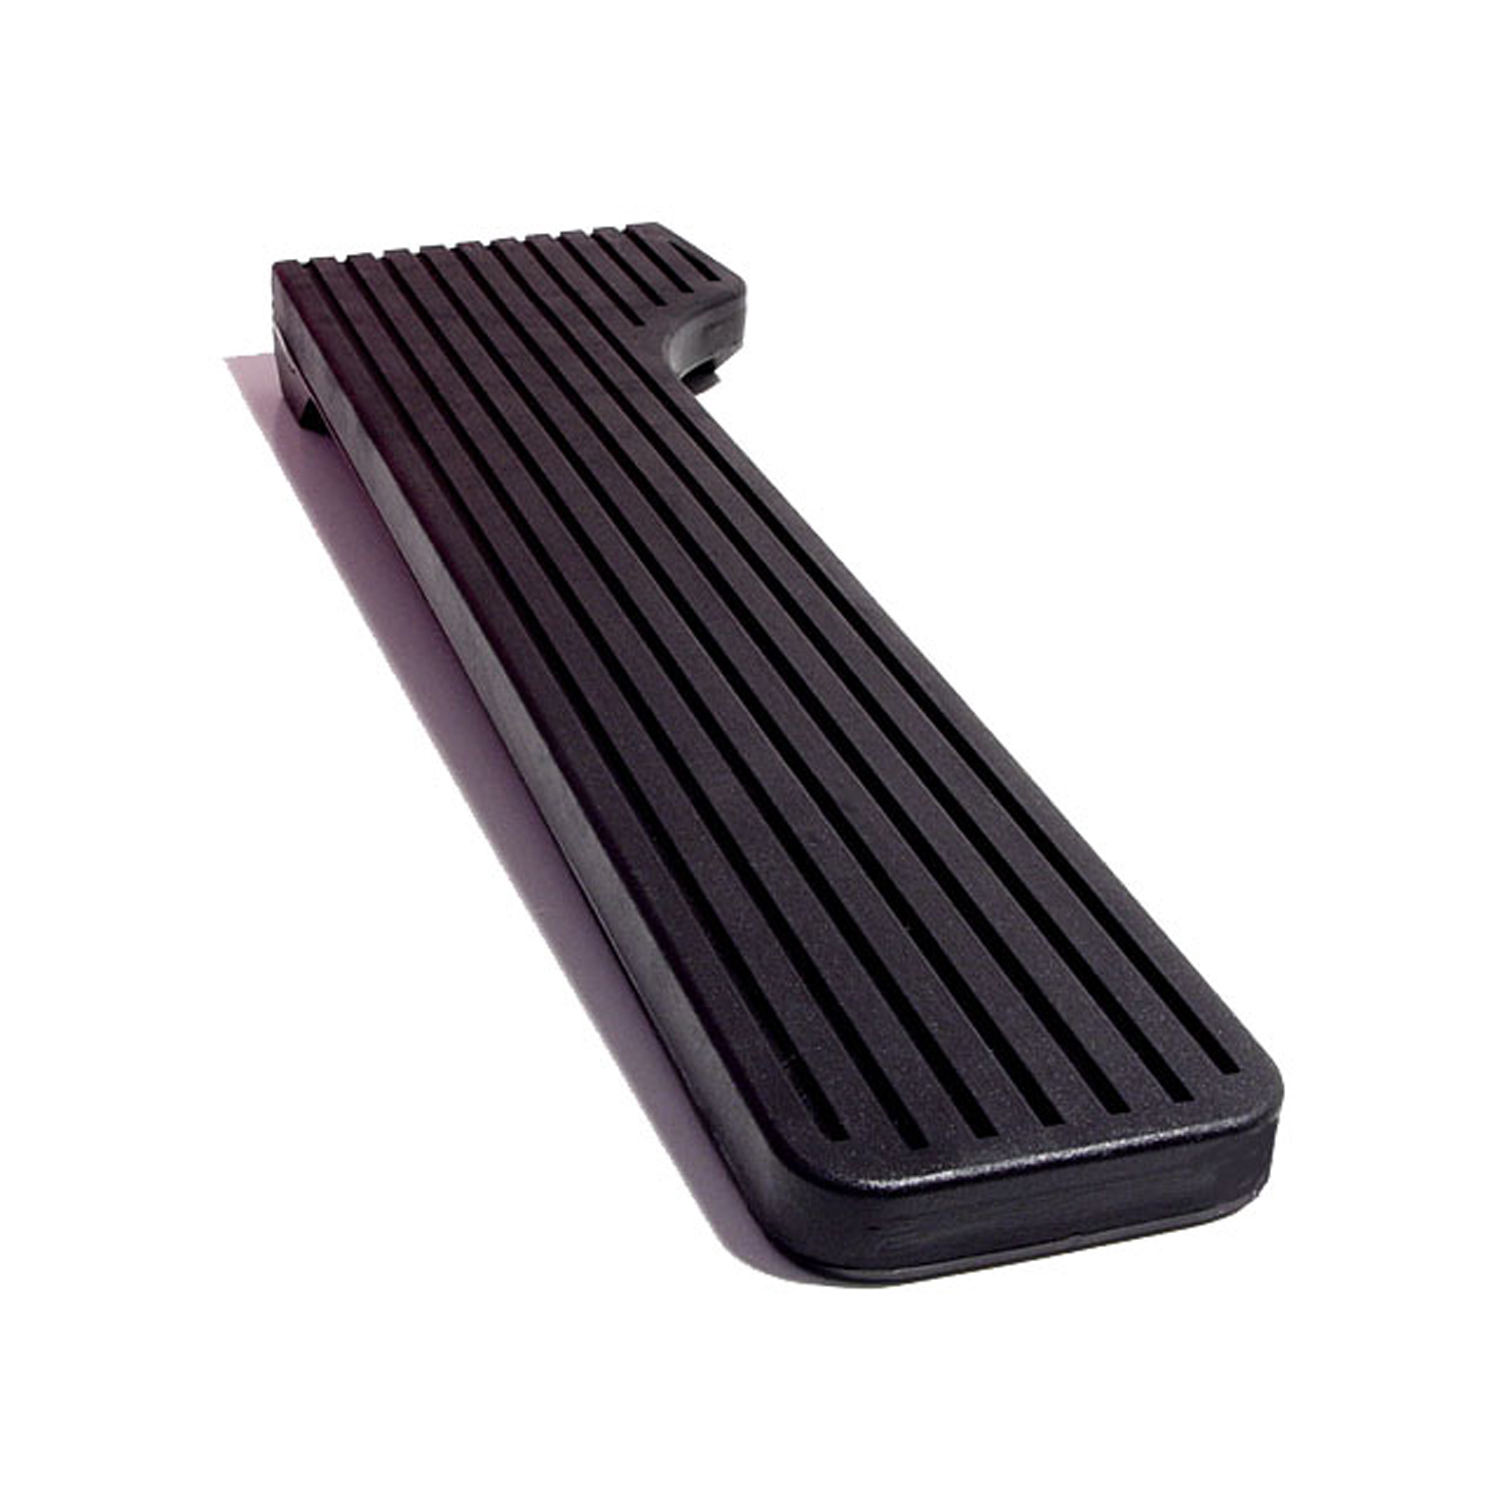 1969 Chevrolet Chevelle Accelerator Pedal Pad without flange-AP 31-B